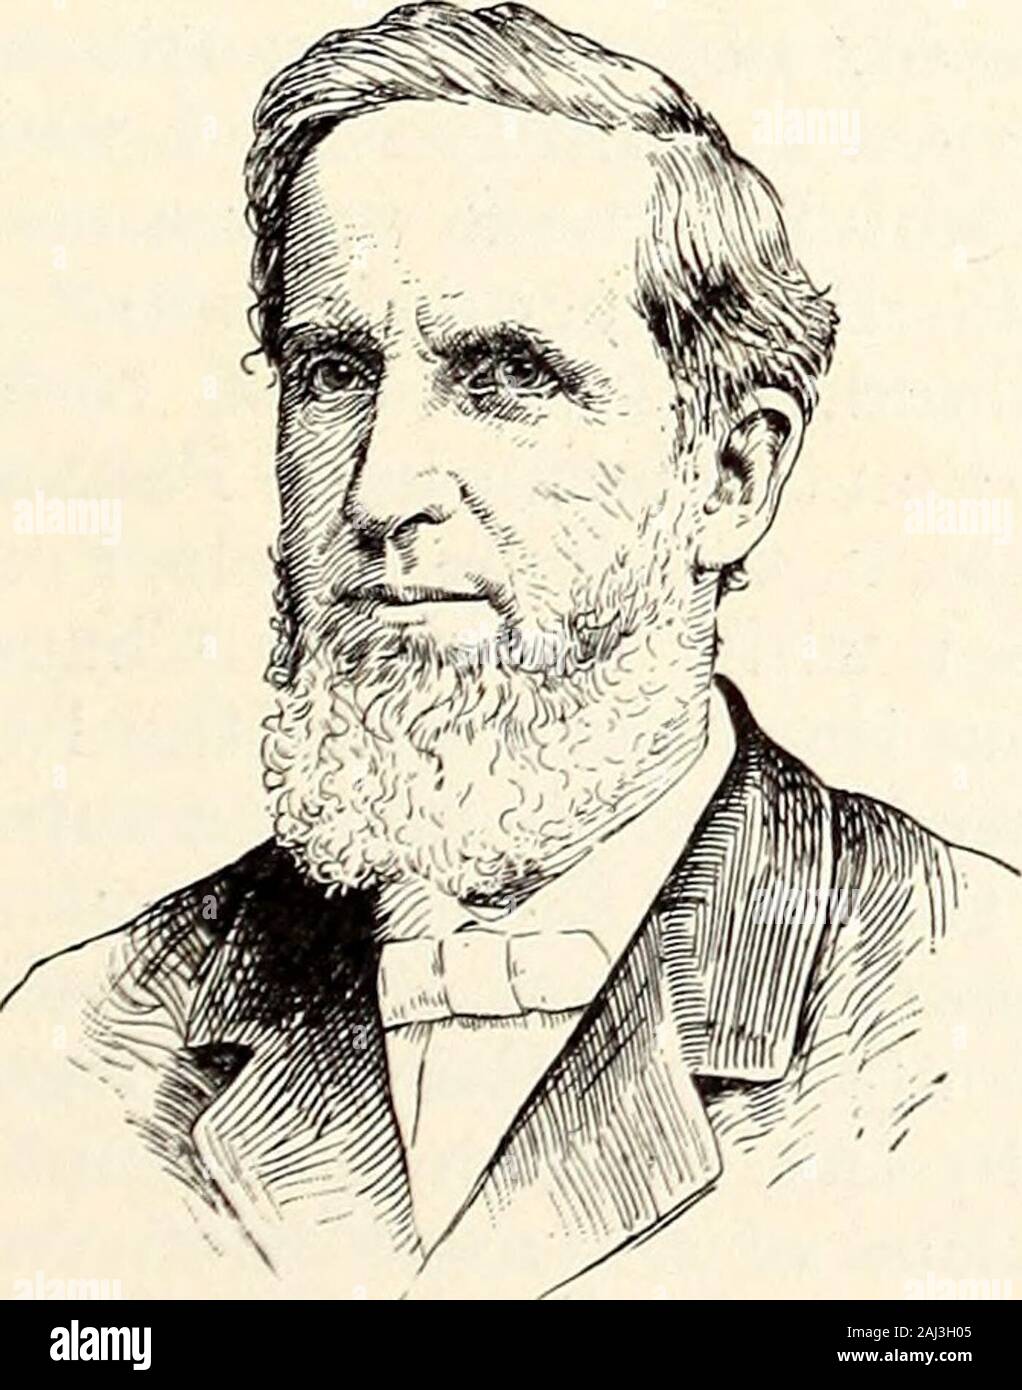 Appletons' cyclopædia of American biography . ined some distinction asa poet by a drama entitled Tecumseh. He trav-elled in Mexico in 1847-9, and from 1851 till 1858practised law in New York city. He then returnedto Ohio, and edited in Cincinnati the SketchClub, an illustrated paper that was supported bythe artists of that city. He published Malmizticthe Toltec, a novel (Cincinnati, 1851), and Ariel,and other Poems (New York, 1855). FOSS, Cyrus David, M. E. bishop, b. in Kings-ton, N. Y., 17 Jan., 1834. His father was an itinerant Methodistpreacher of Hugue-not extraction. Theson was graduated Stock Photo